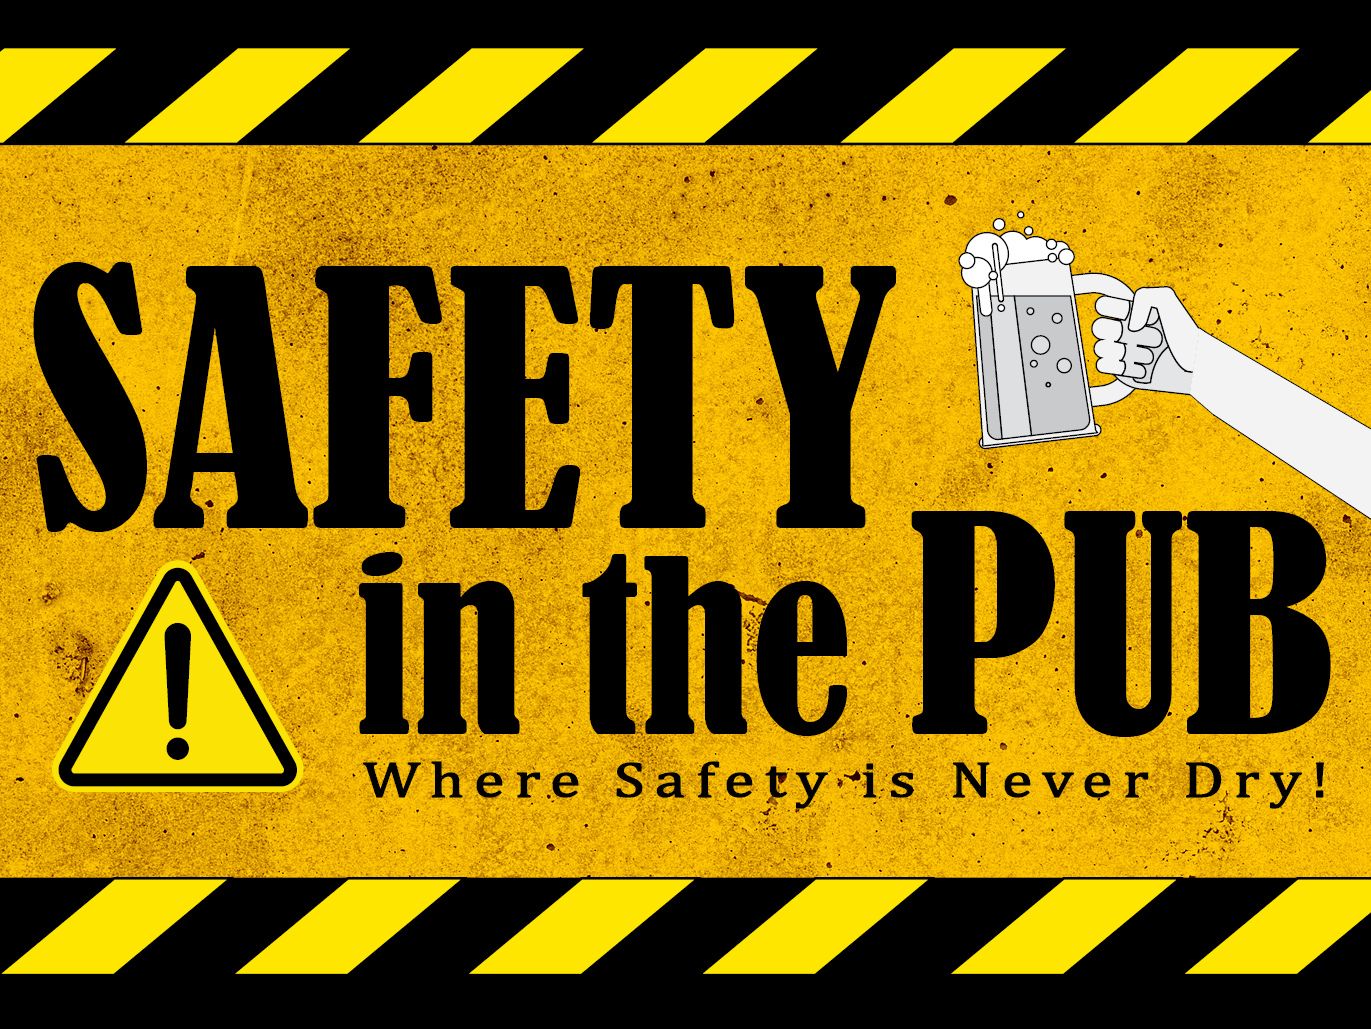 Safety in the pub